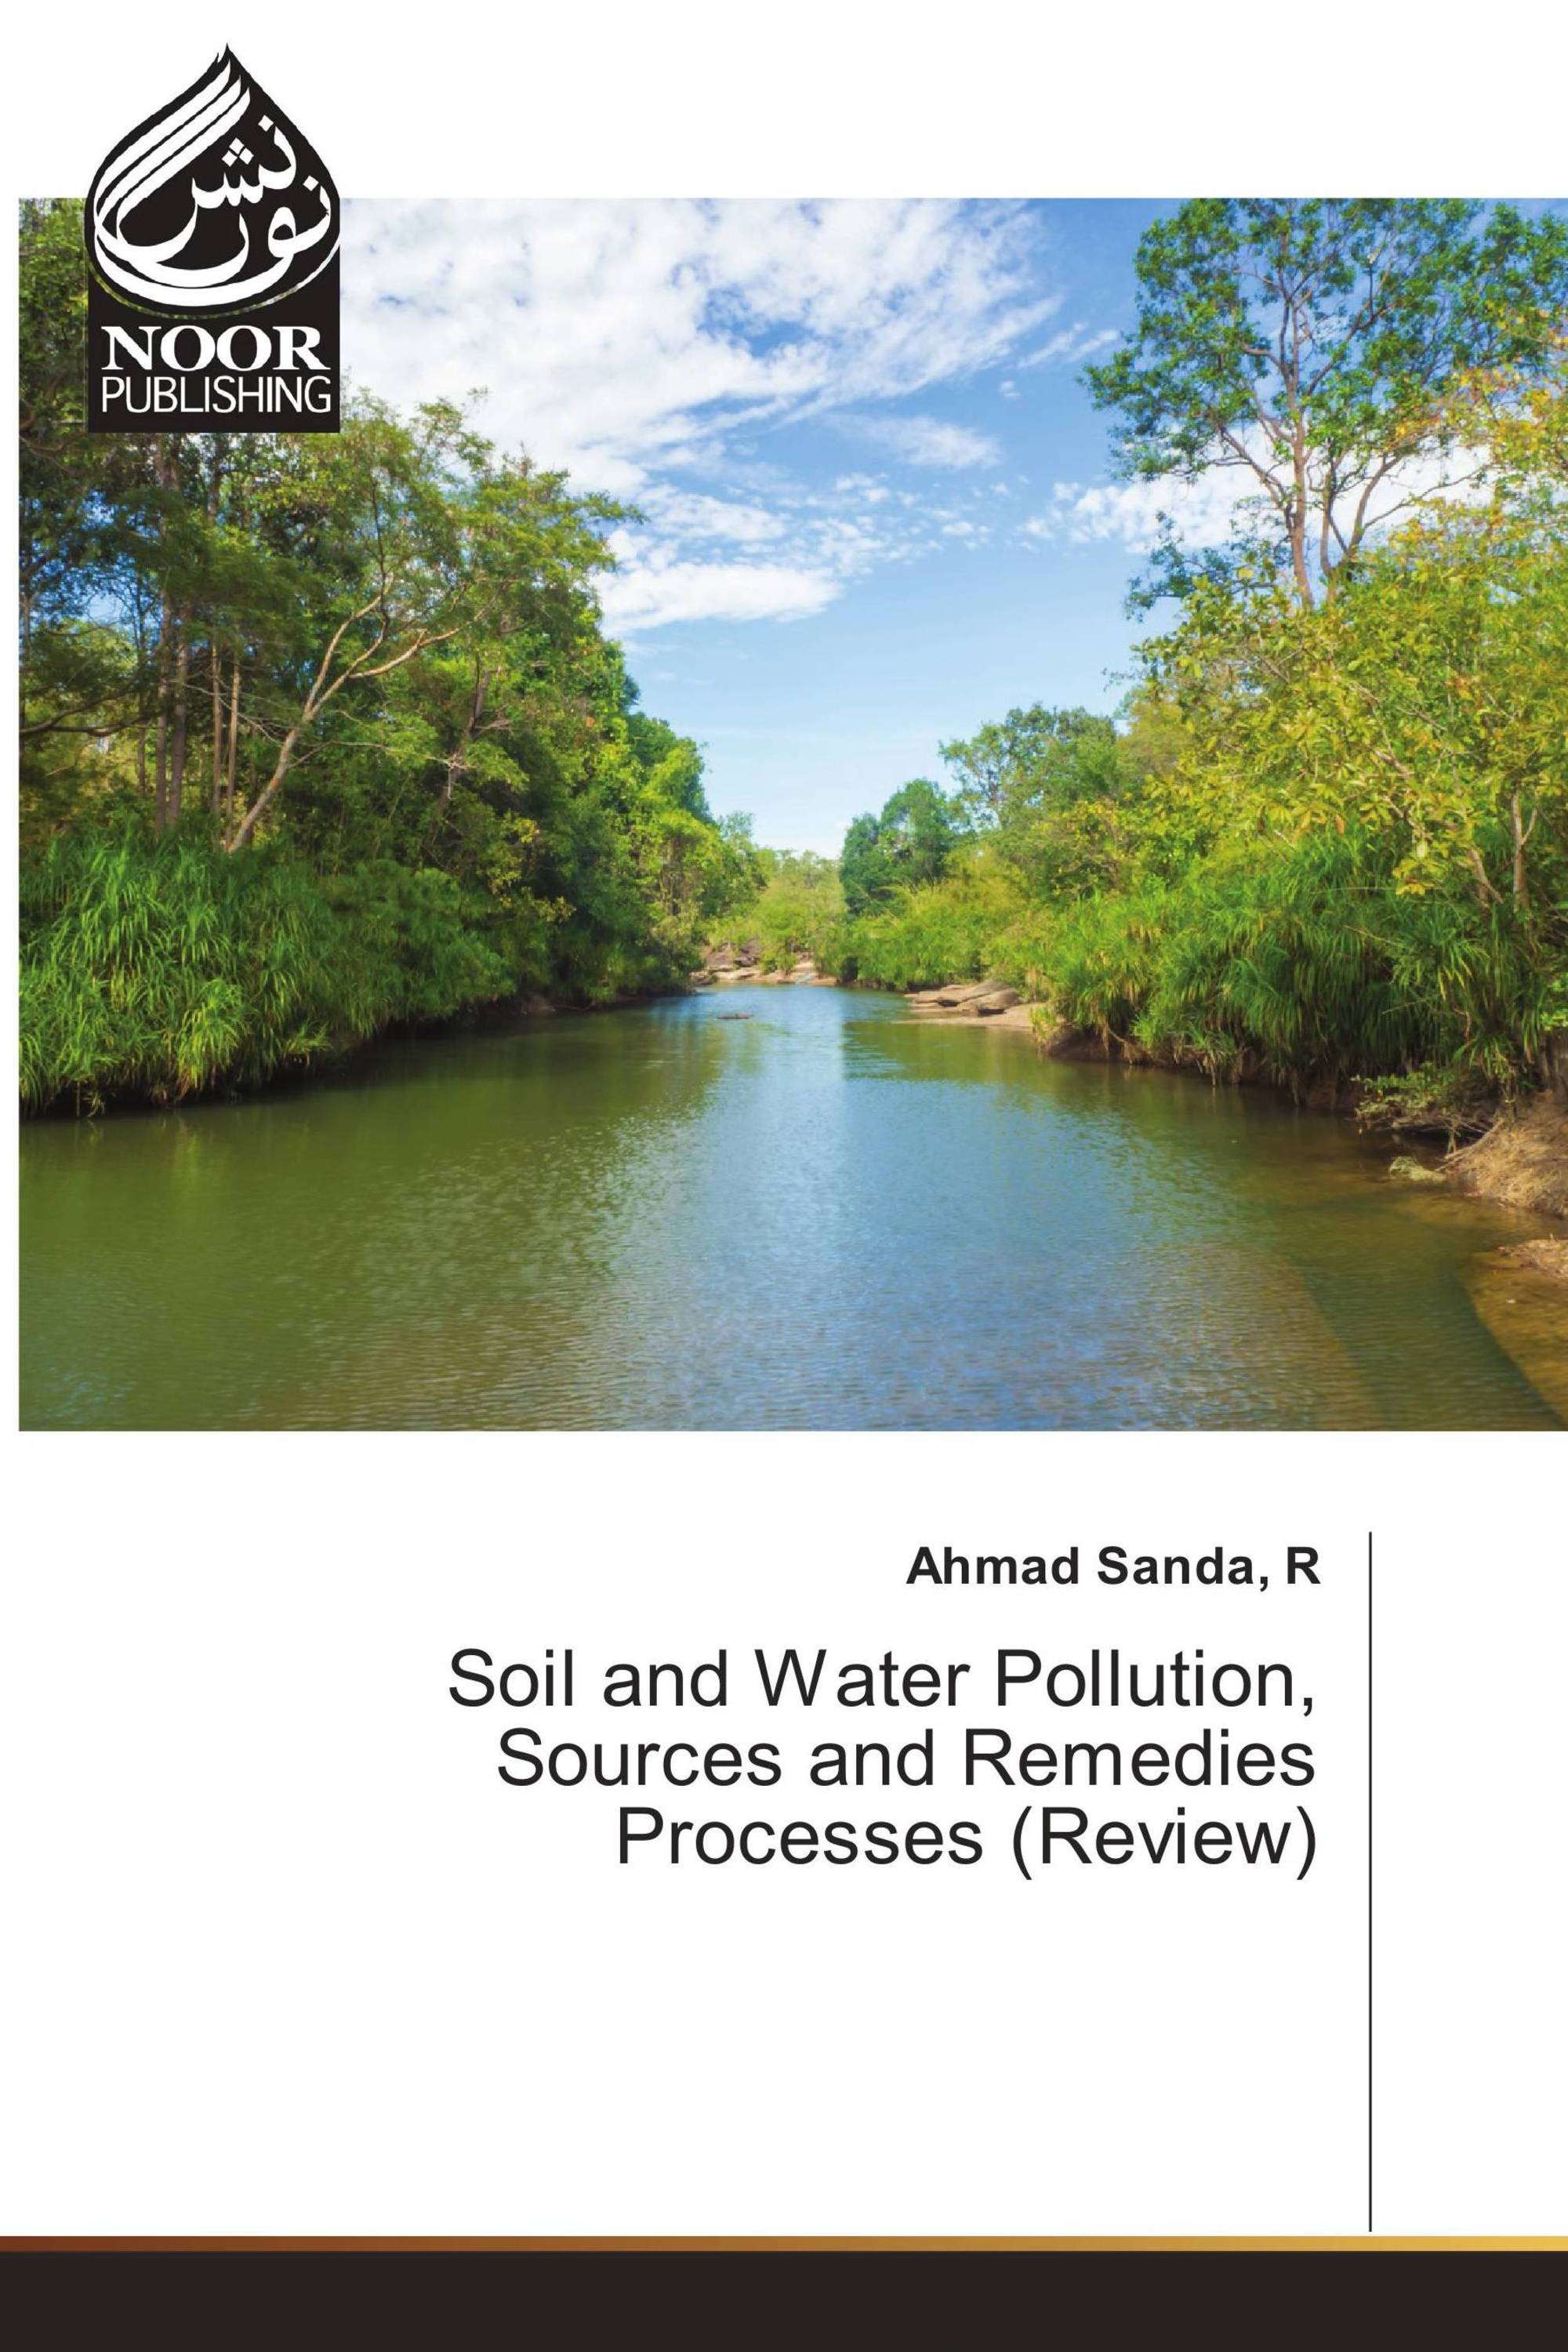 Soil and Water Pollution, Sources and Remedies Processes (Review)